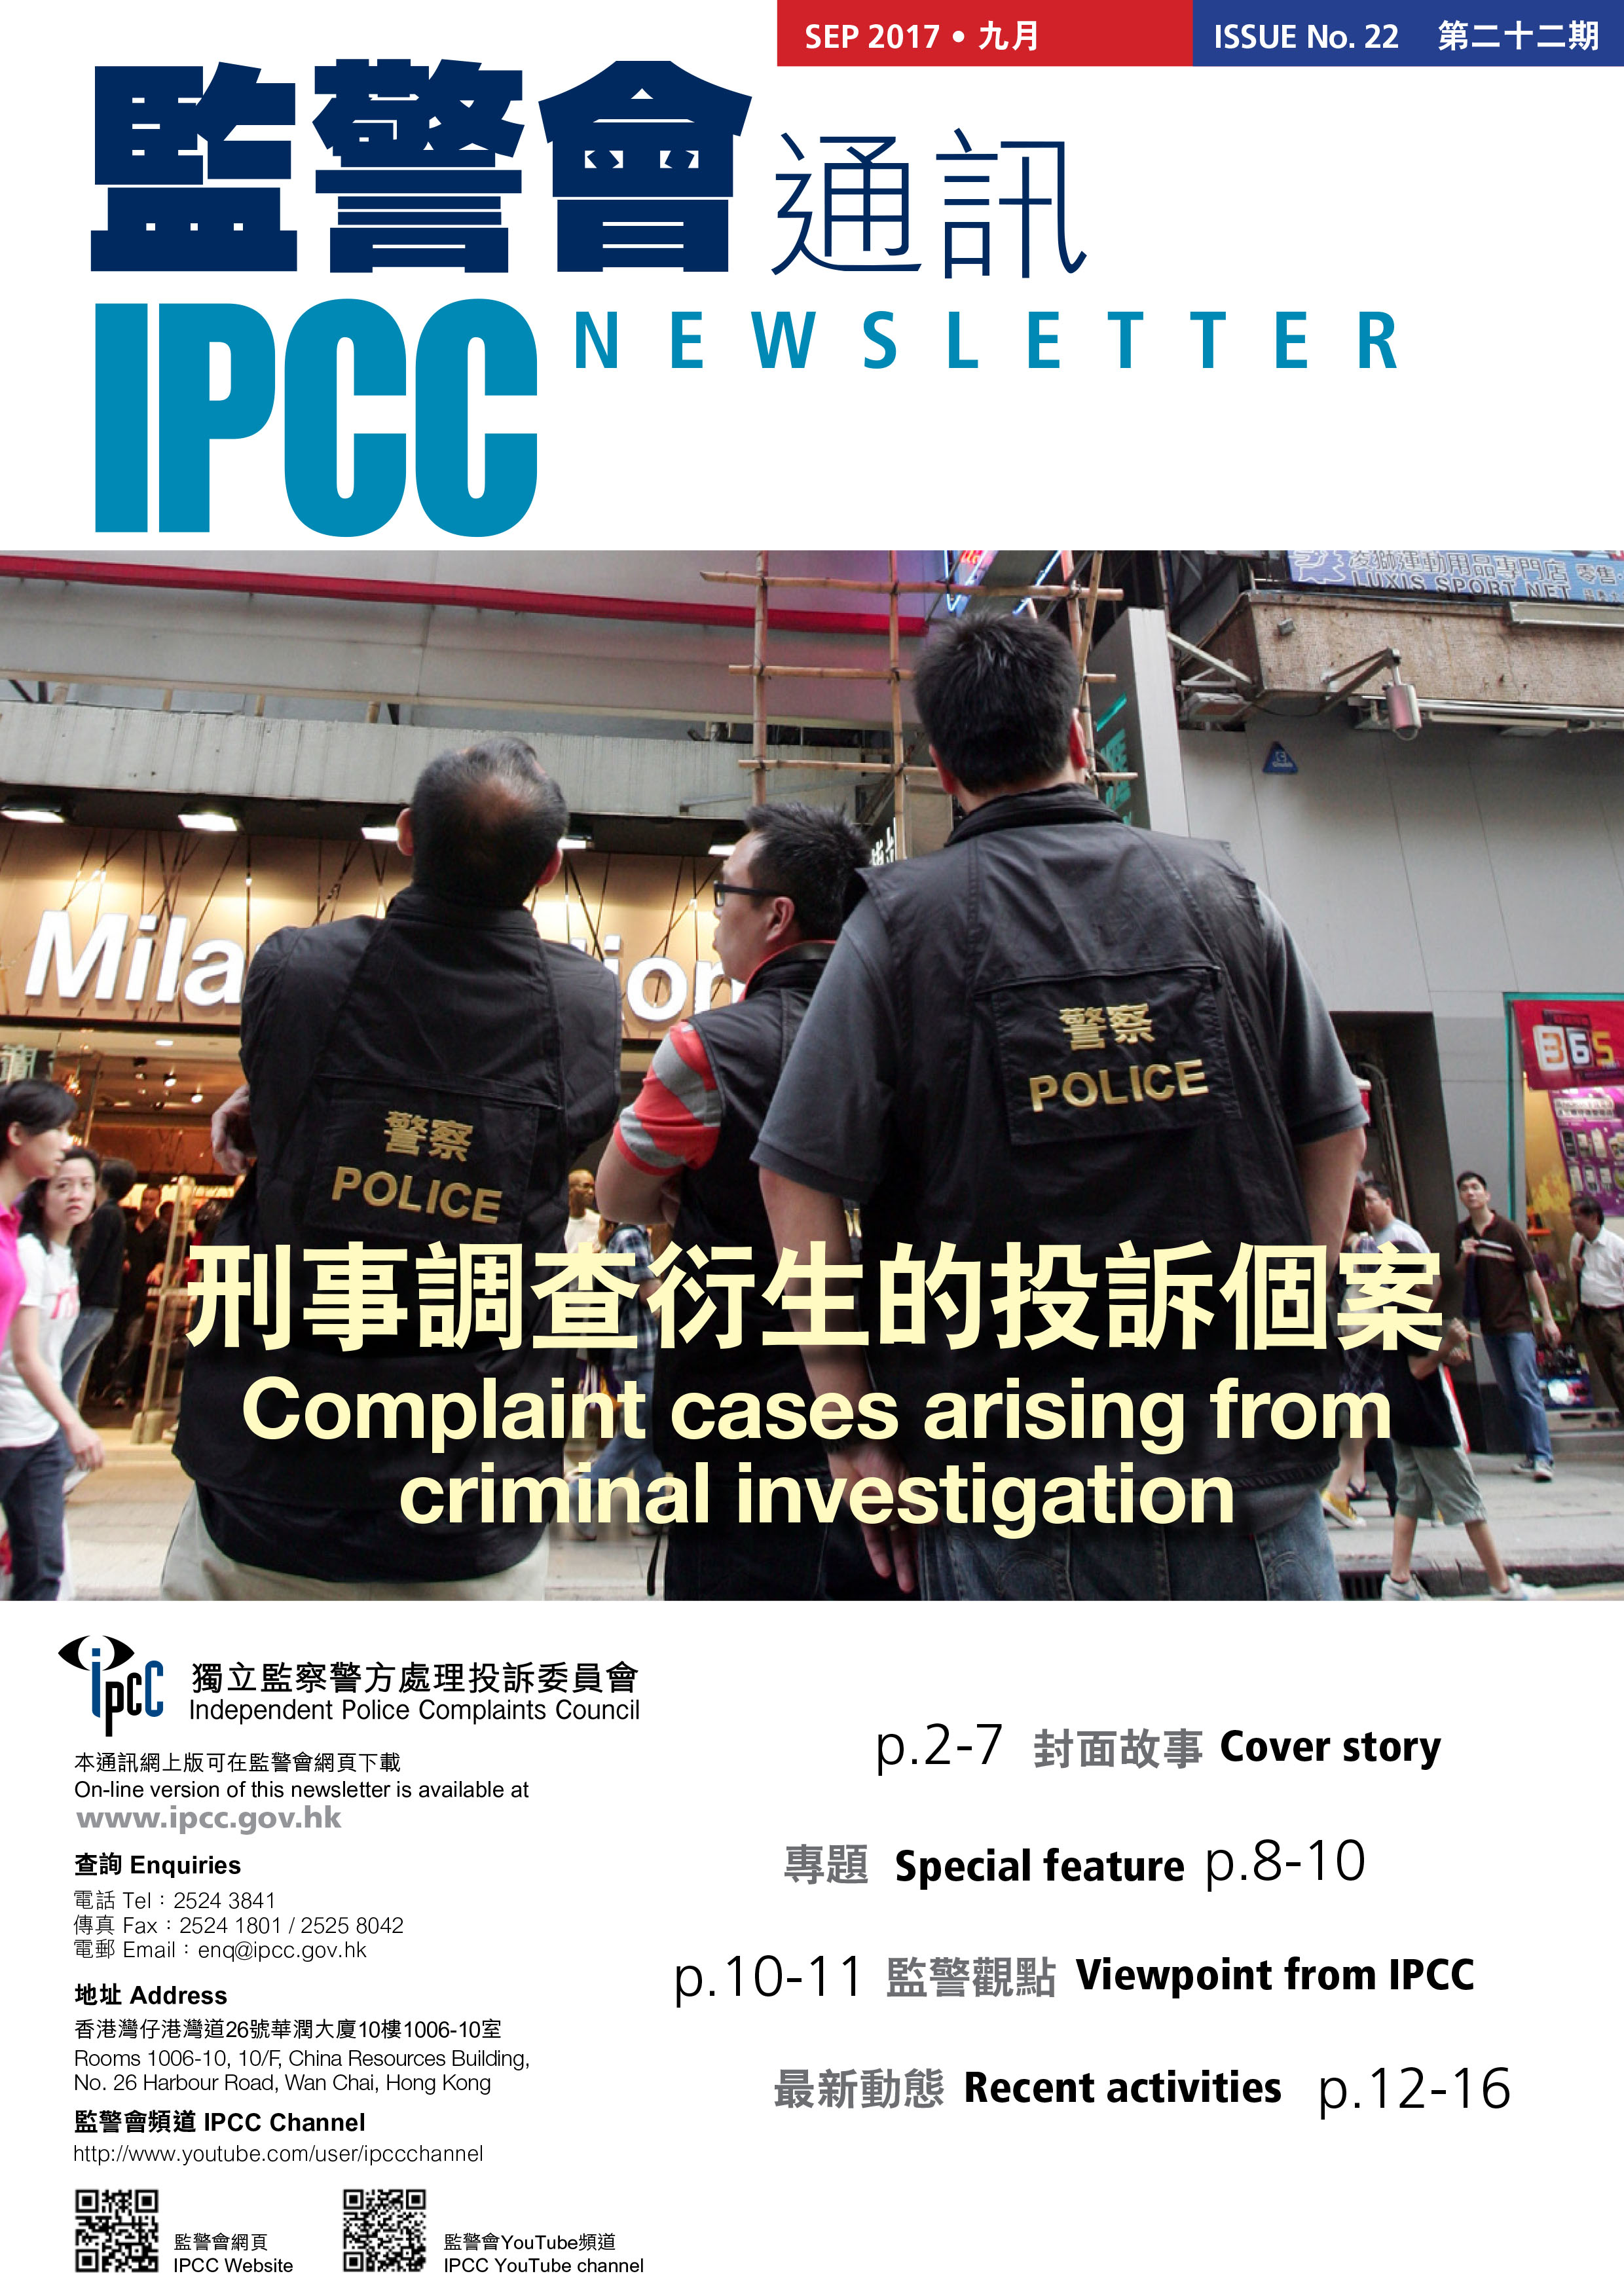 Issue No. 22 (Sep 2017) Cover